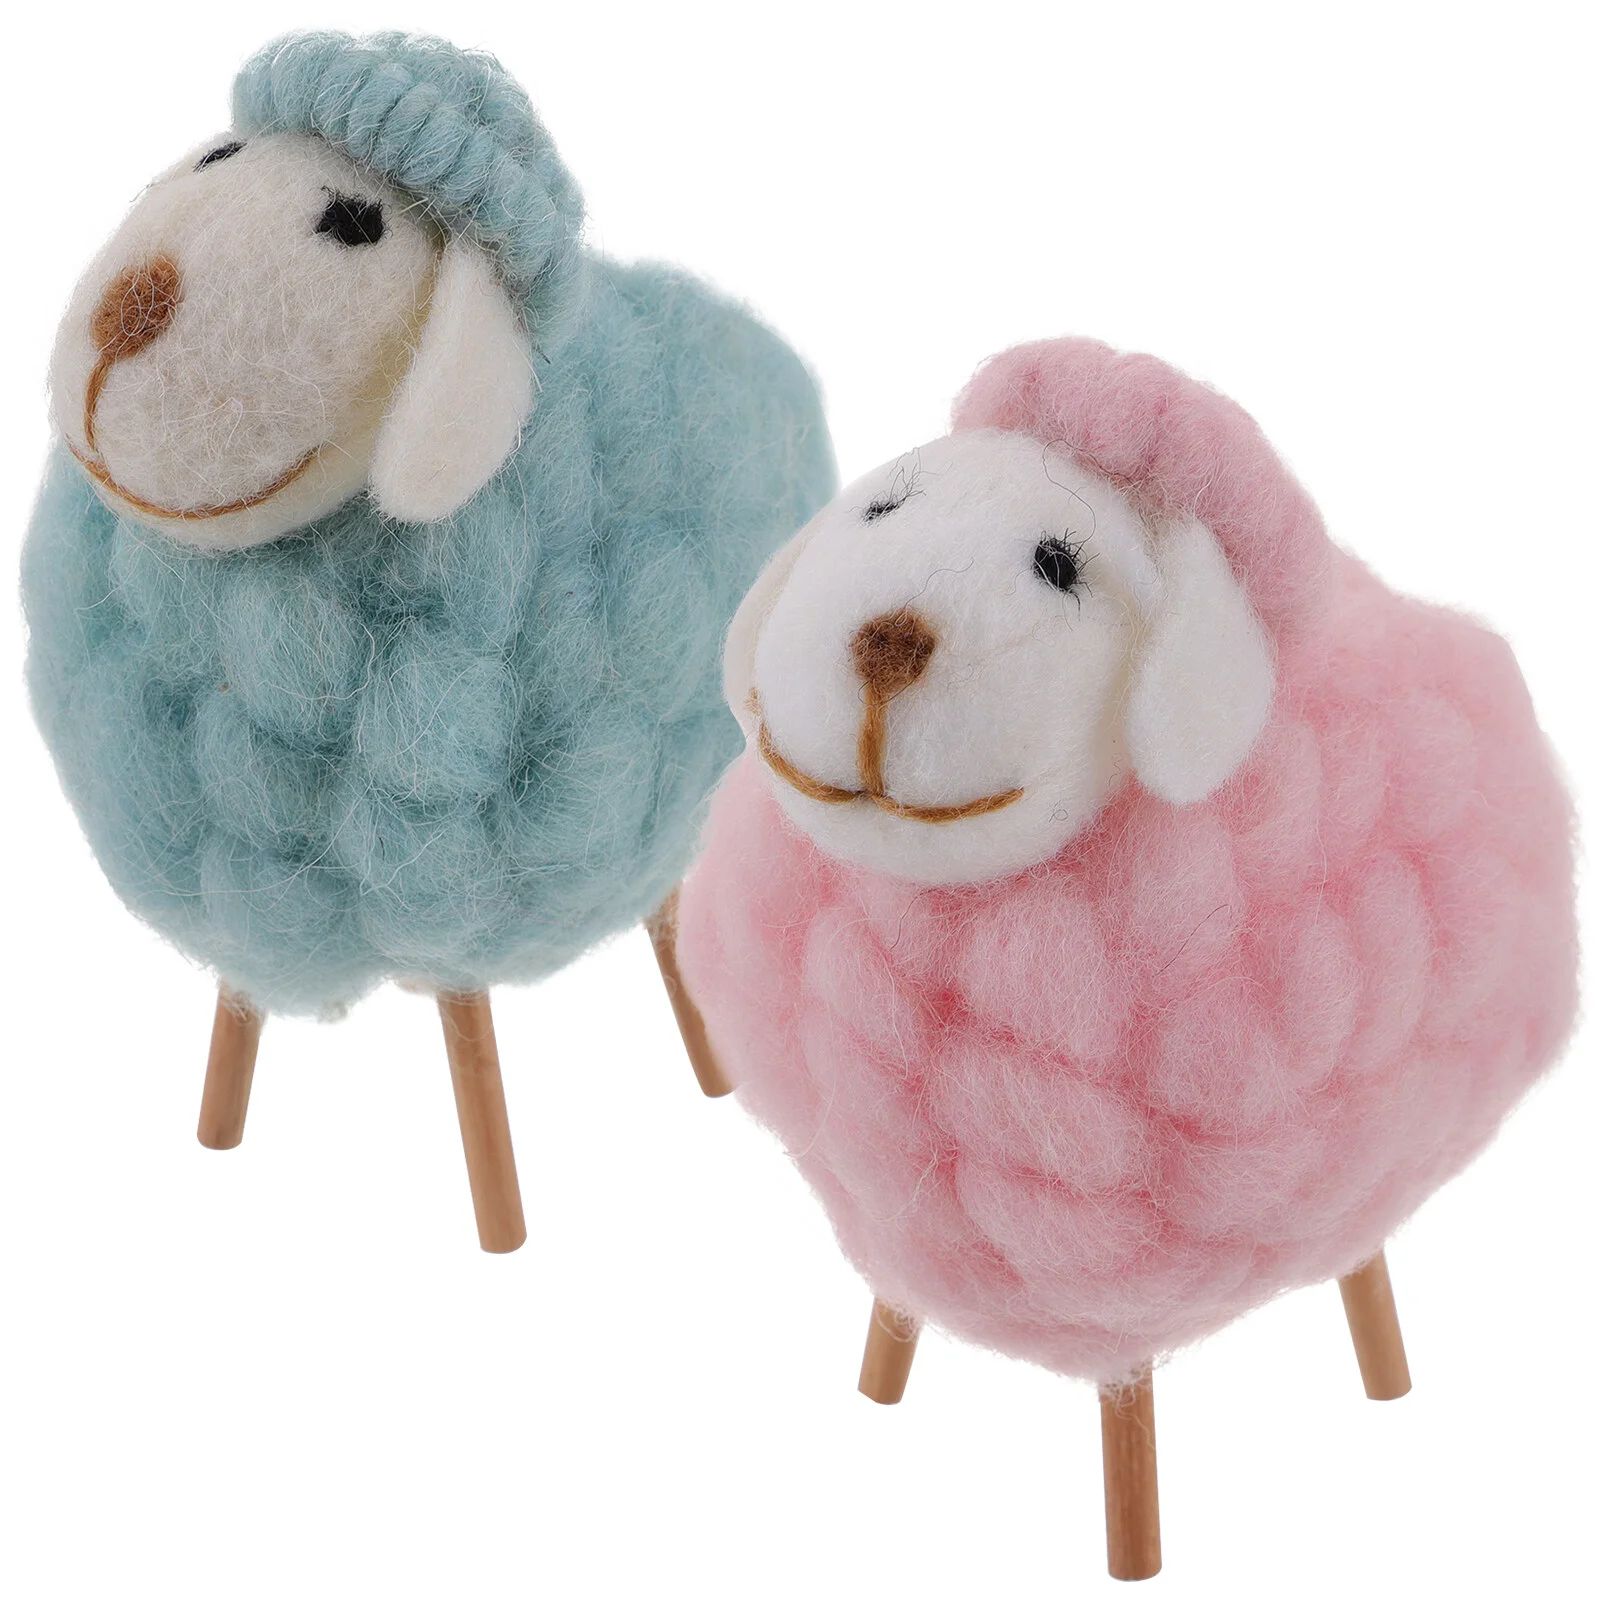 

2 Pcs Woolfeltsheep Small Table Home Decor Felted Crafts Ornaments Adornments Animal Statue Decors